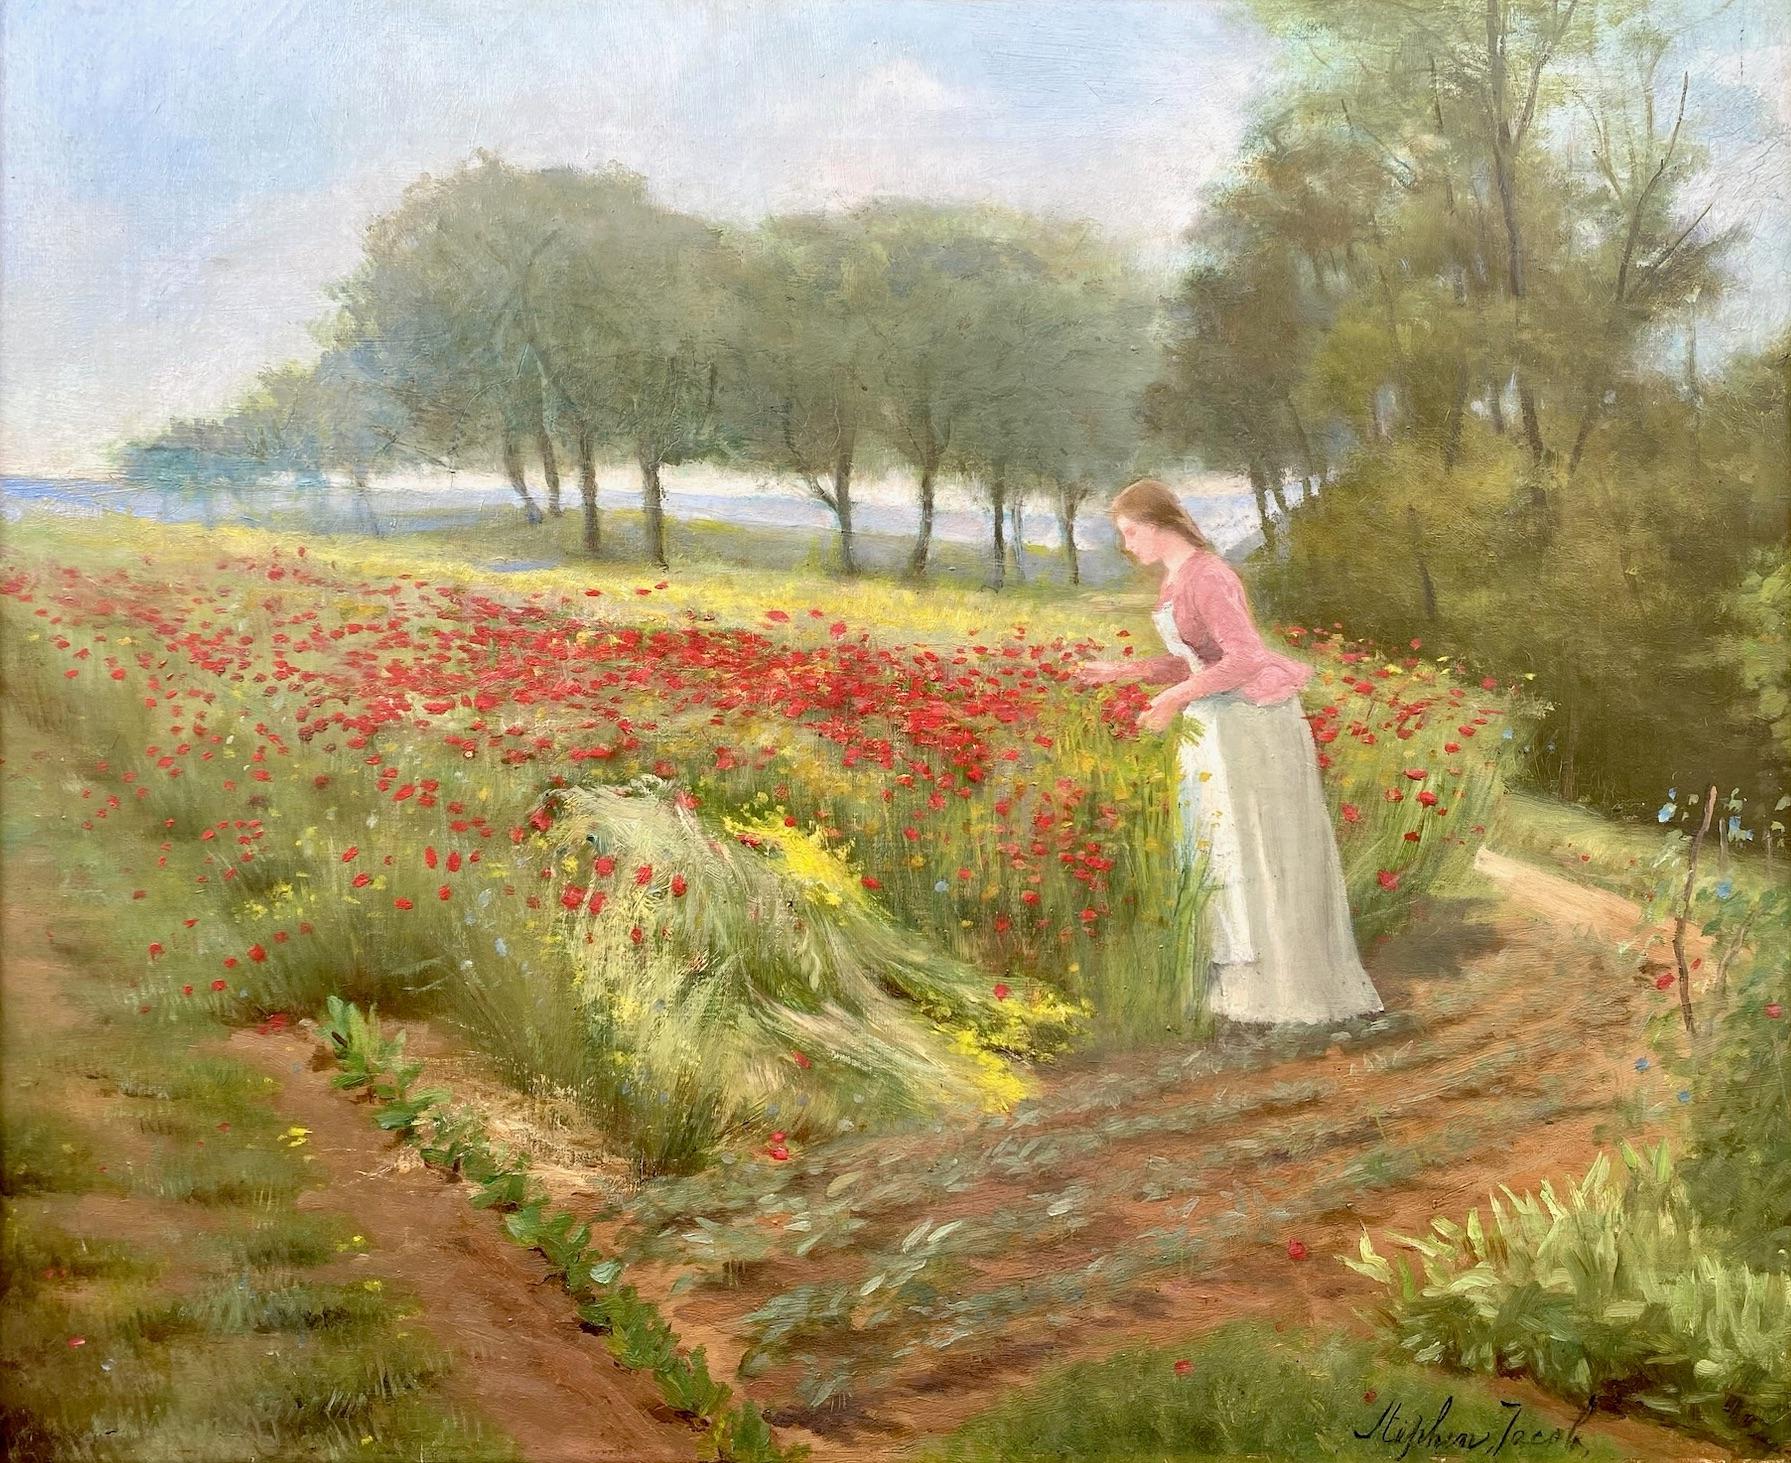 Gathering wild red poppies: woman in a poppy field French Impressionist painting - Painting by Stephen Jacob